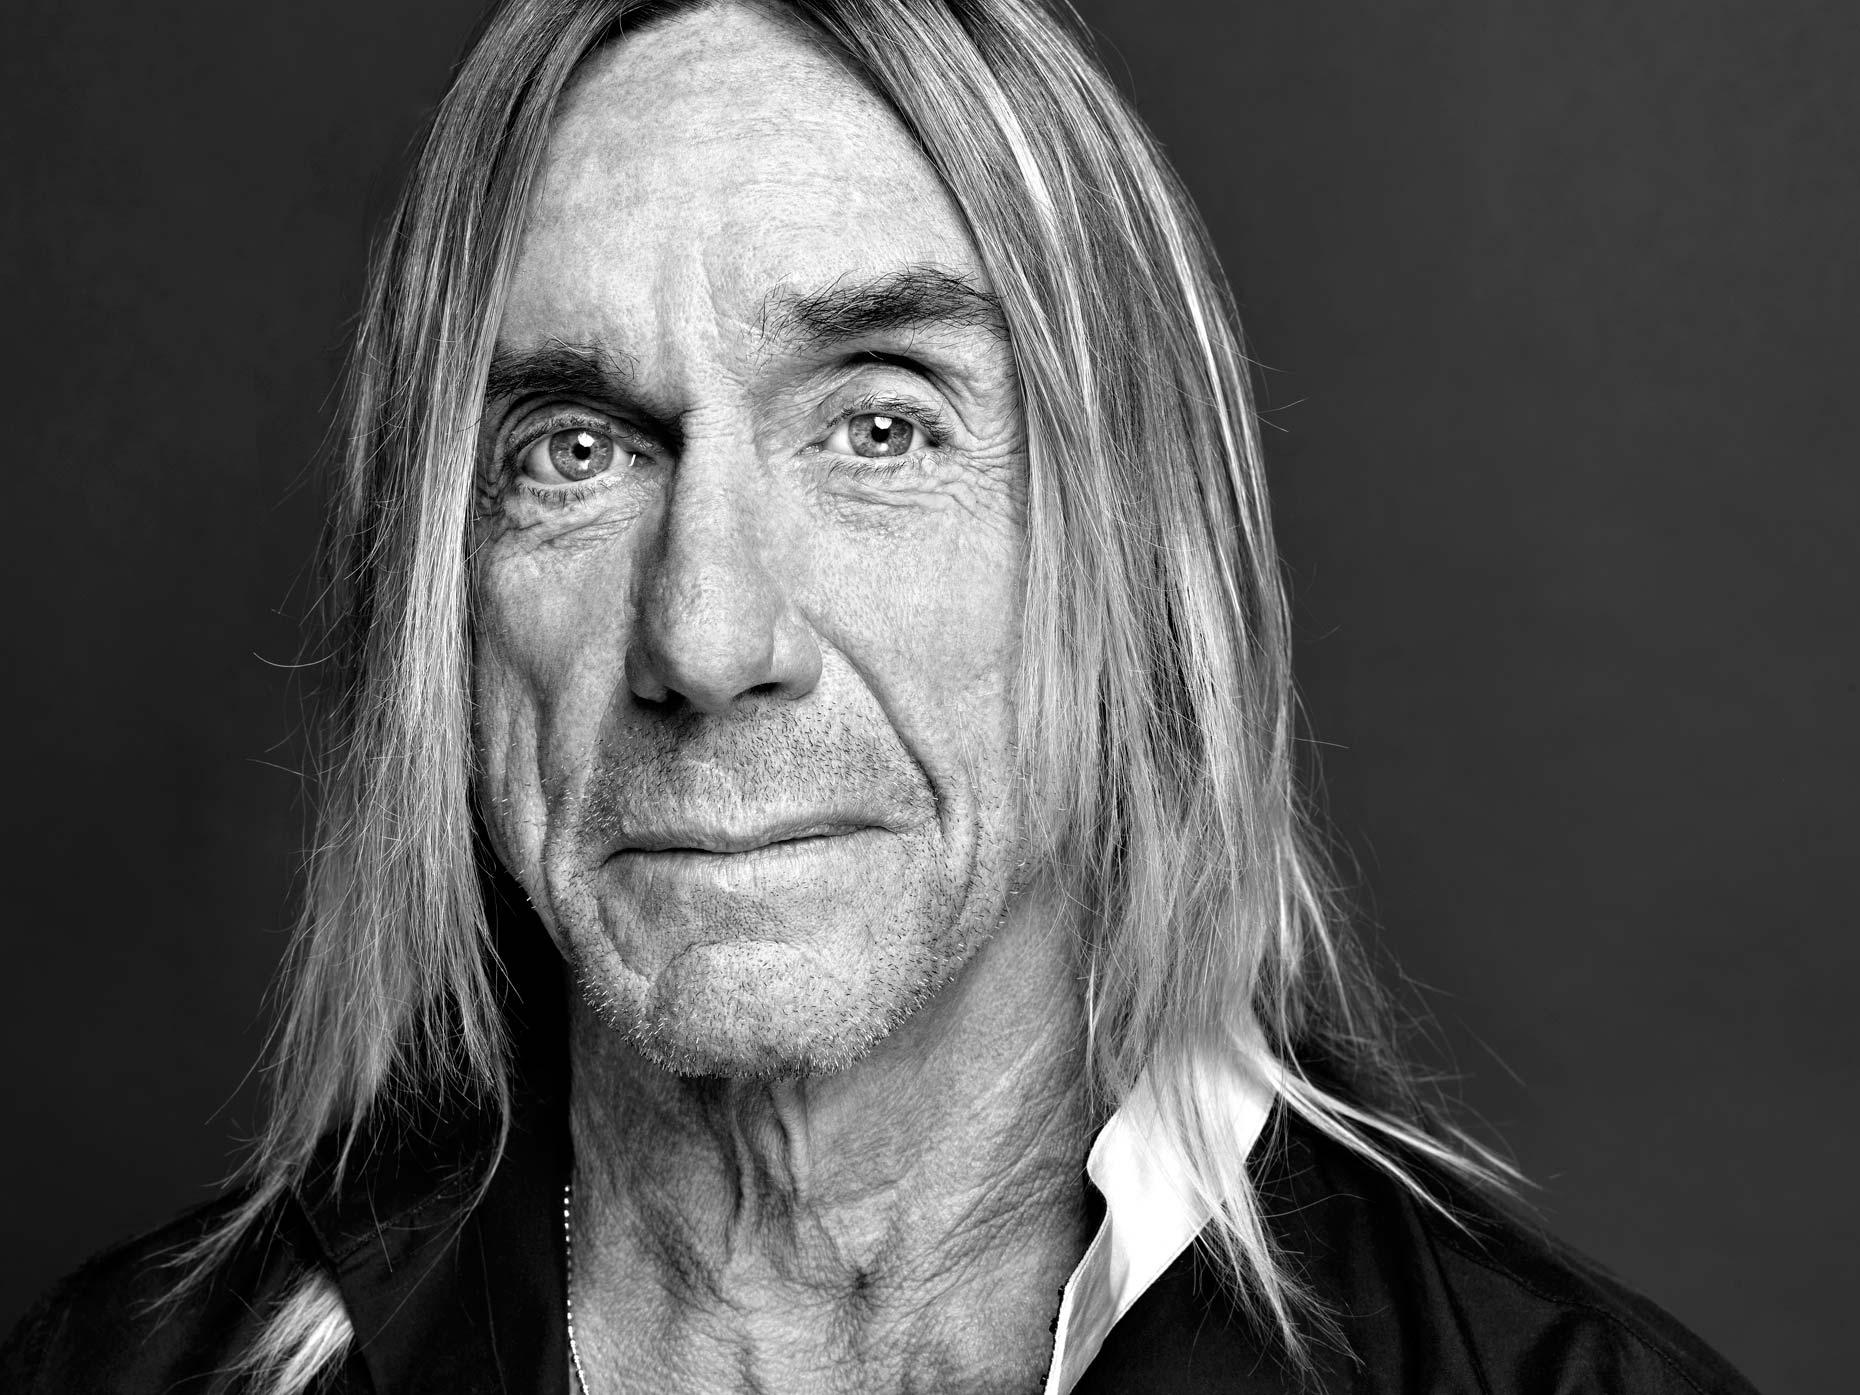 Happy birthday James Newell Osterberg, Jr., known professionally as Iggy Pop. He s 70 today! 